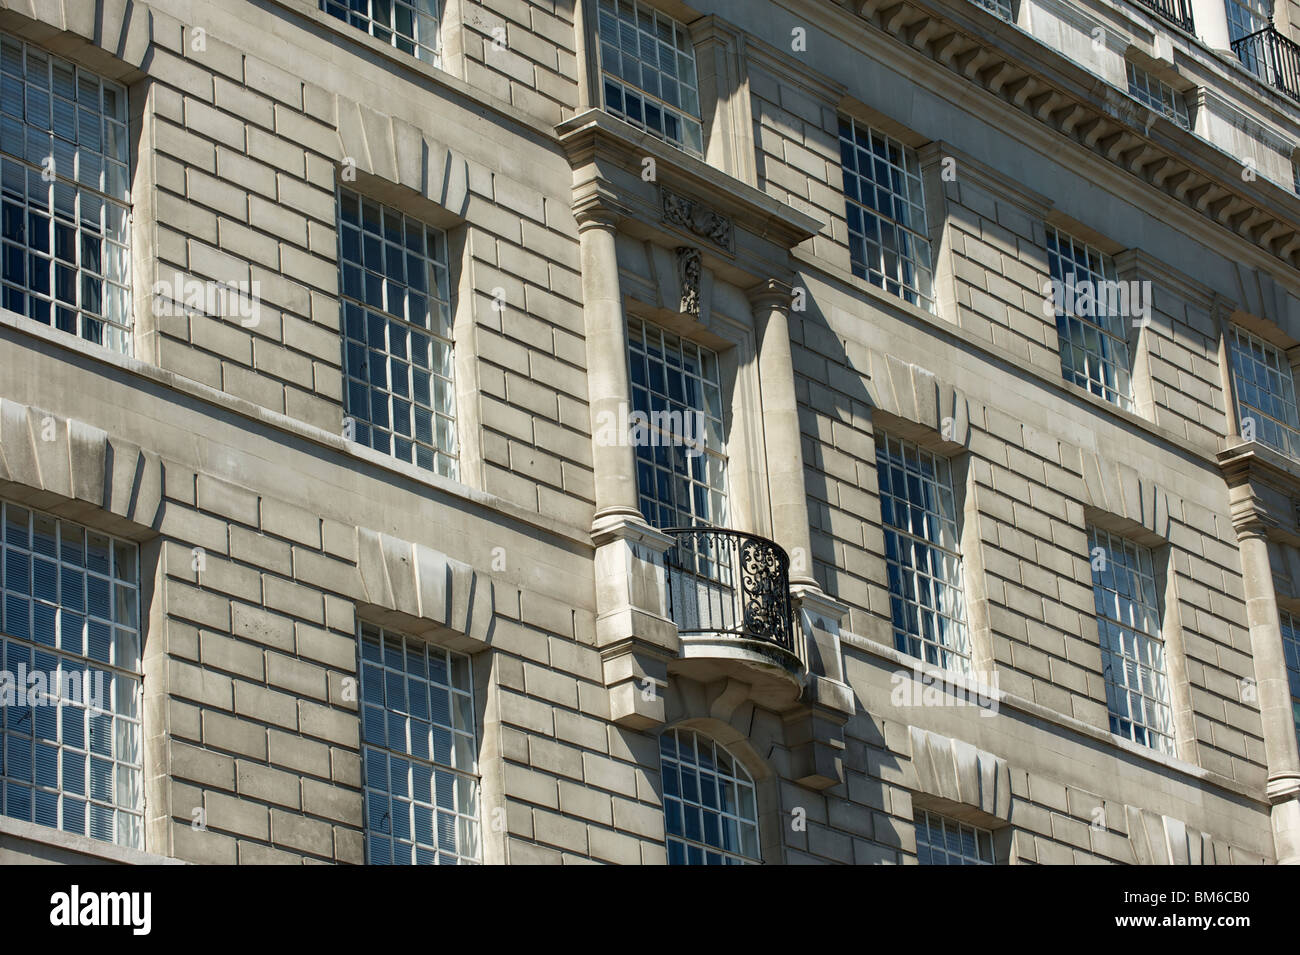 Mi5 building exterior. Thames House was built in 1930 and is on Millbank, Westminster, London. Stock Photo